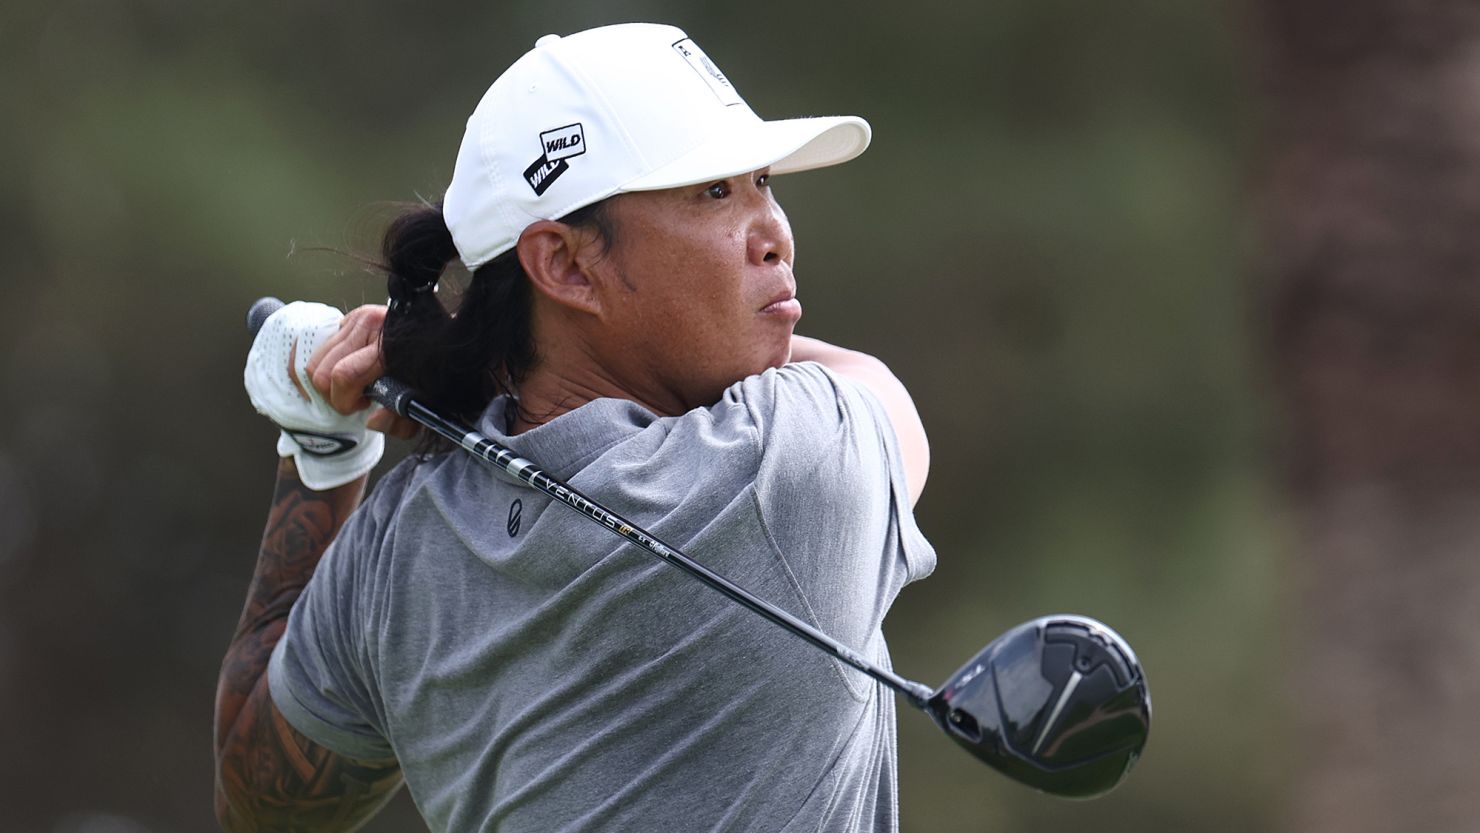 Anthony Kim finishes last on first pro start in 12 years at LIV Golf event  | CNN